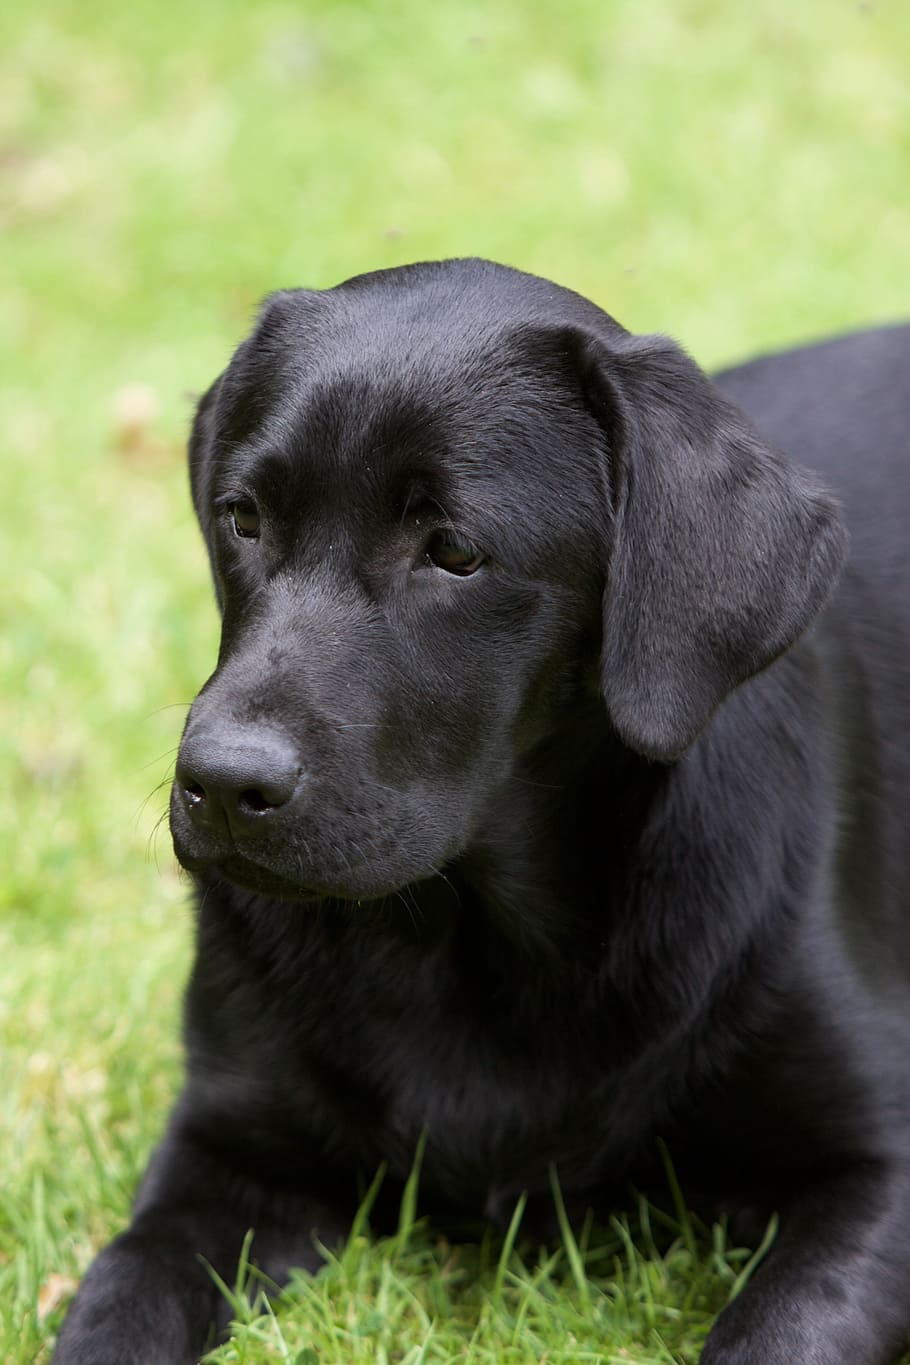 Labrador, Dog, Black, Garden, labrador, dog, black, garden, young, puppy, pet, animal